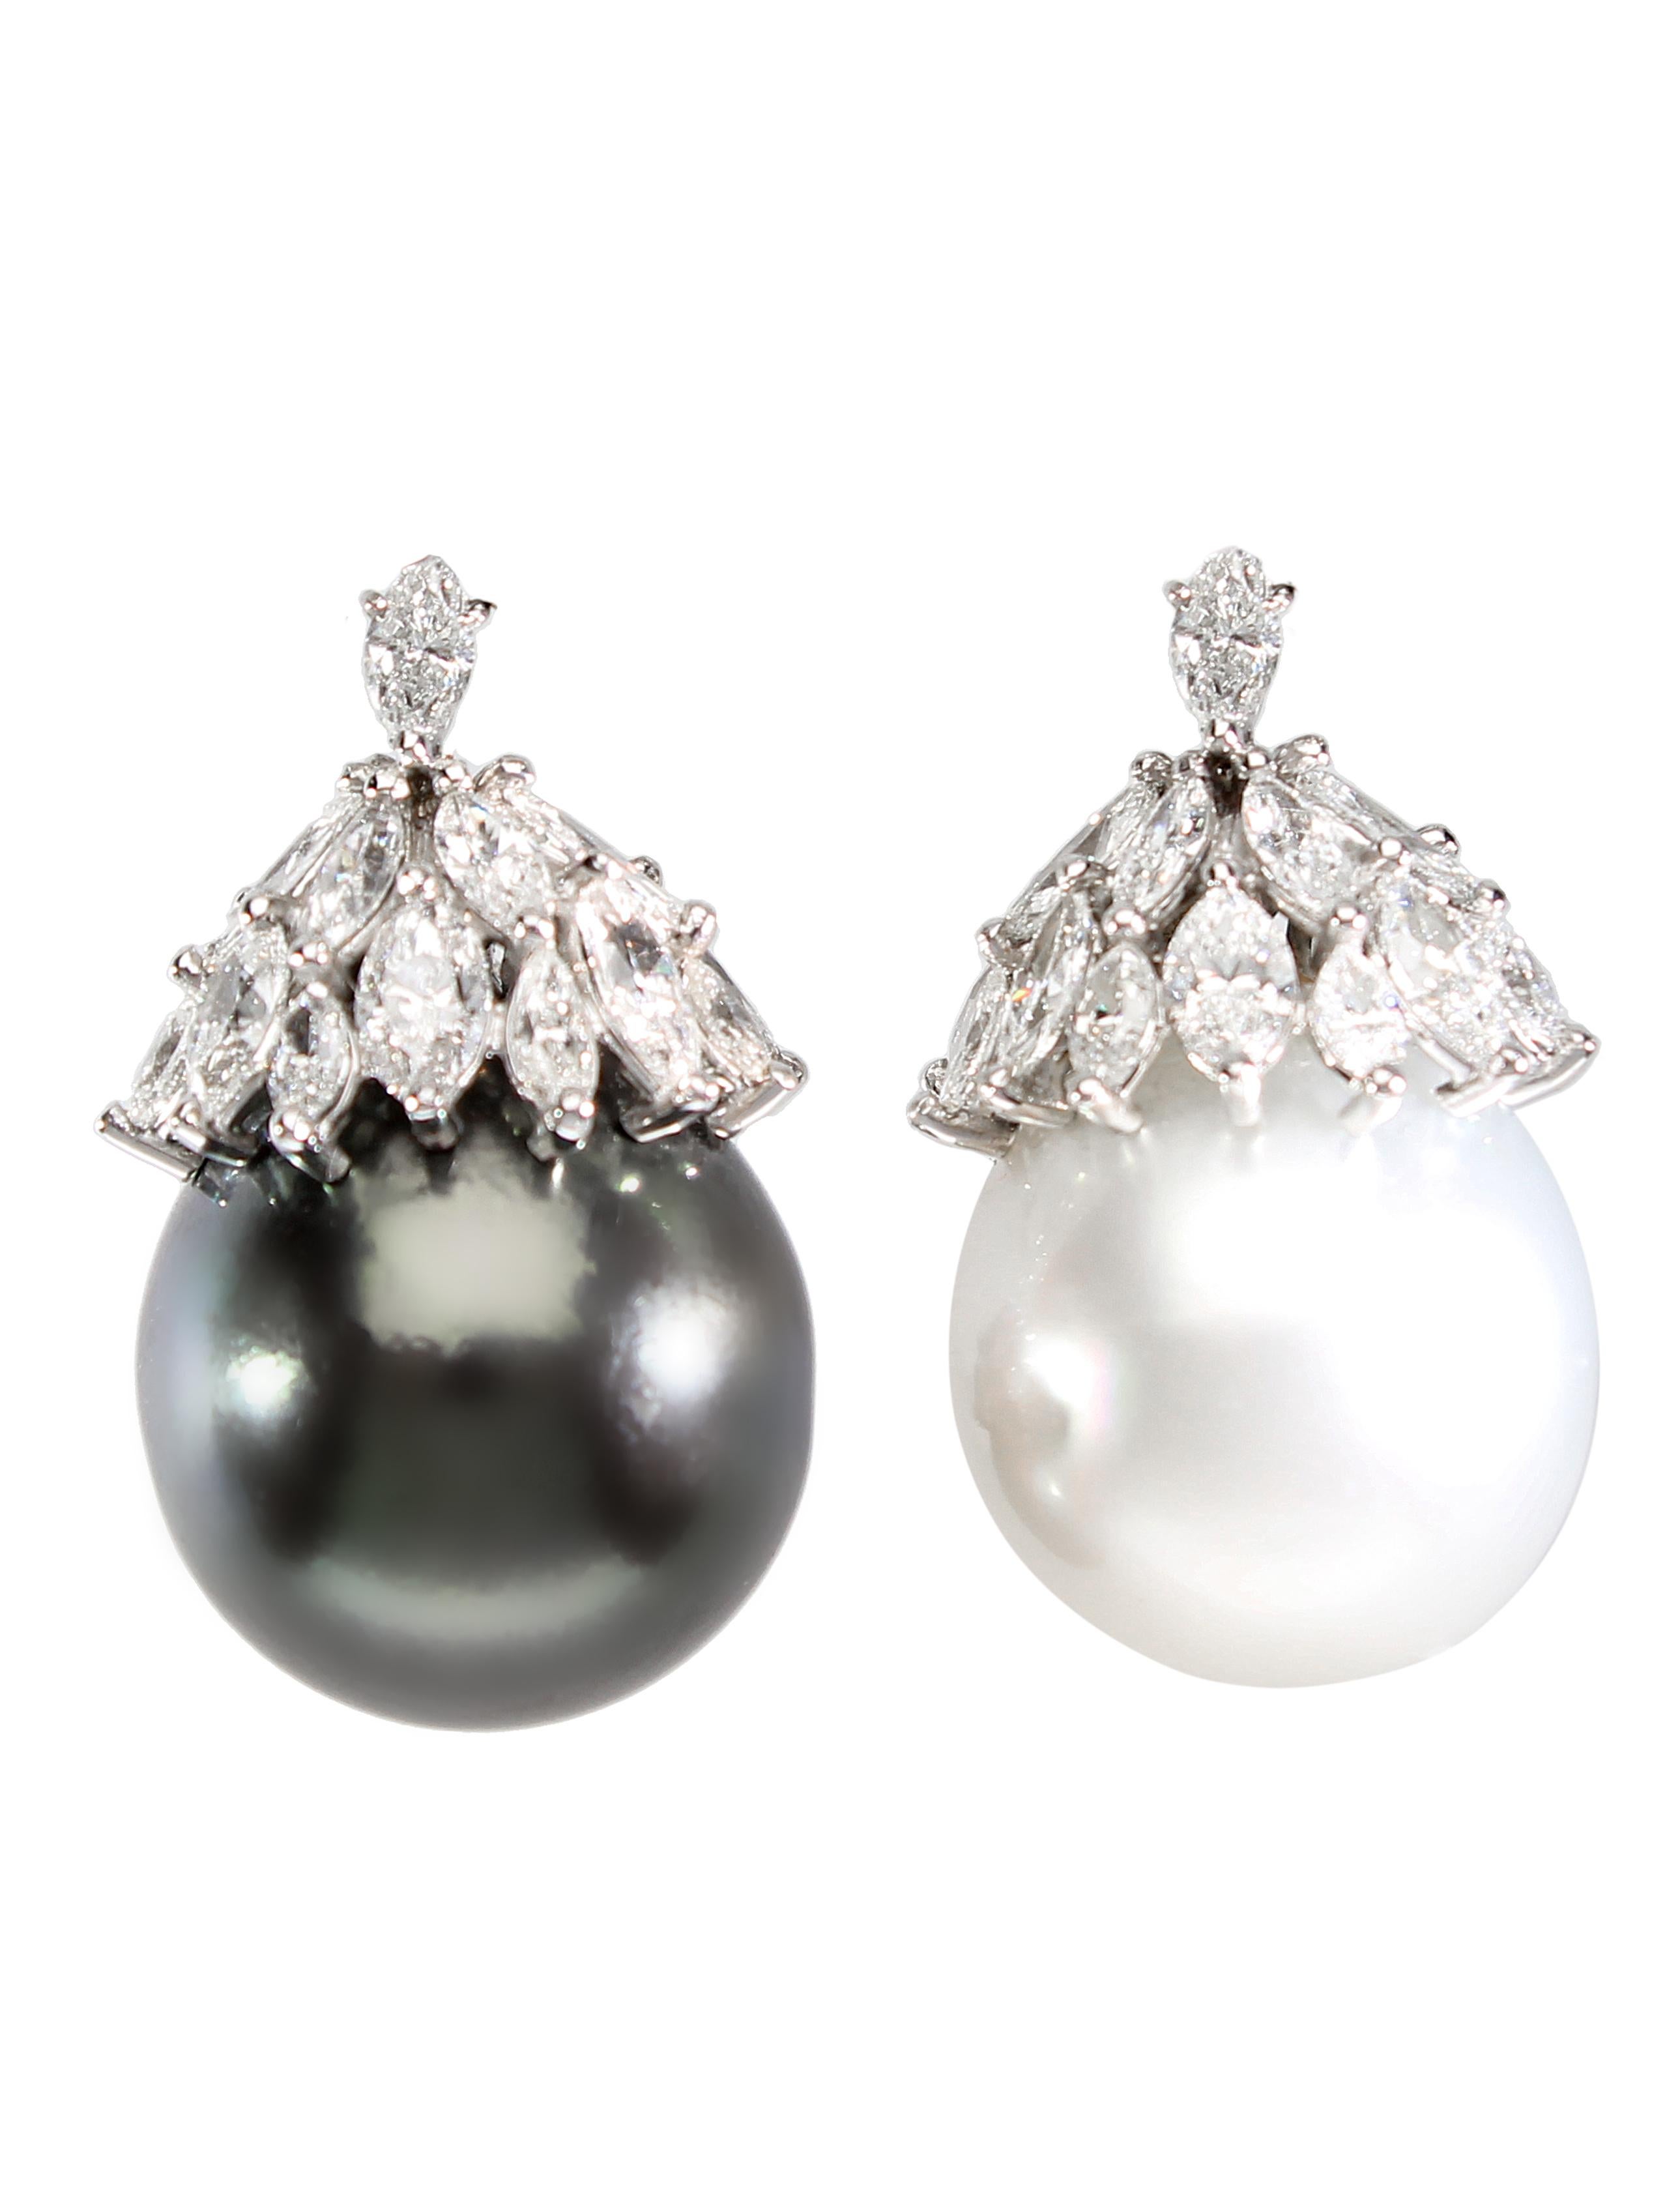 Women's Pederzani Signed Earrings for about 10.00 Ct of Diamonds and Pearls For Sale